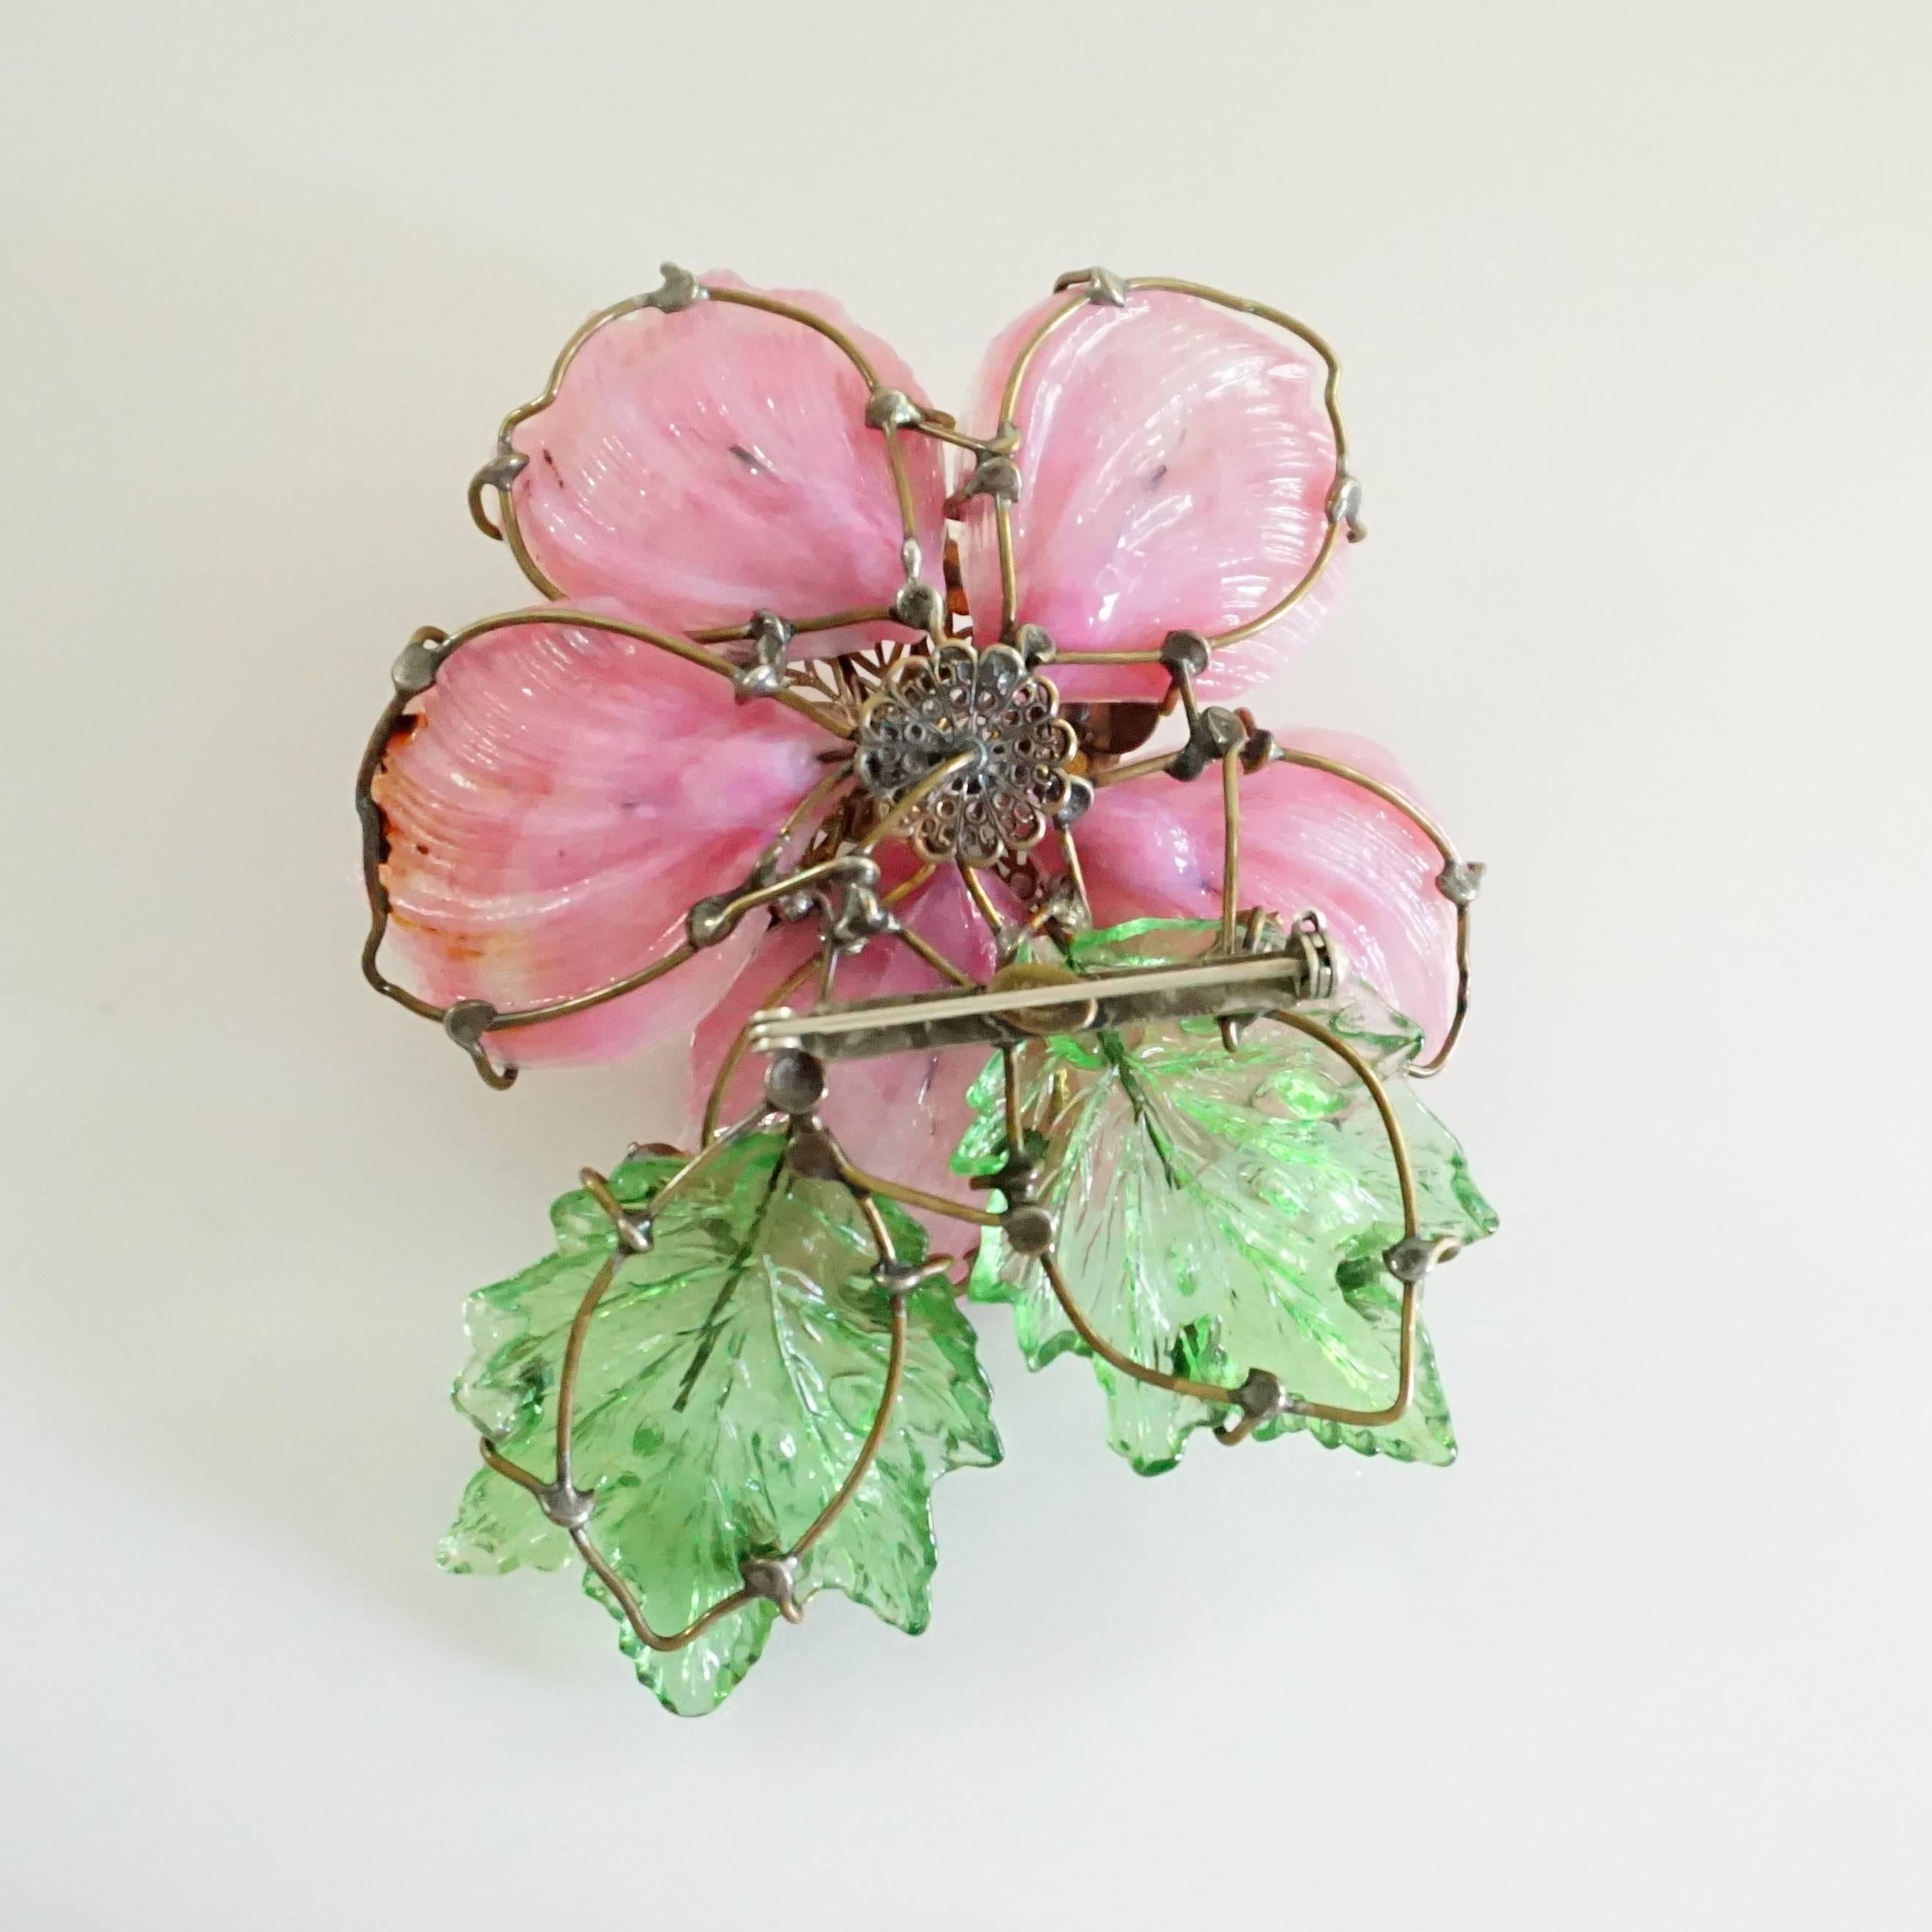 This Lawrence Vrba flower brooch is pink with green leaves. Around the center is a circle of pearls and surrounding the leaves and petals are rhinestones. This brooch is in very good condition with wear consistent with the age.

Measurements
Height